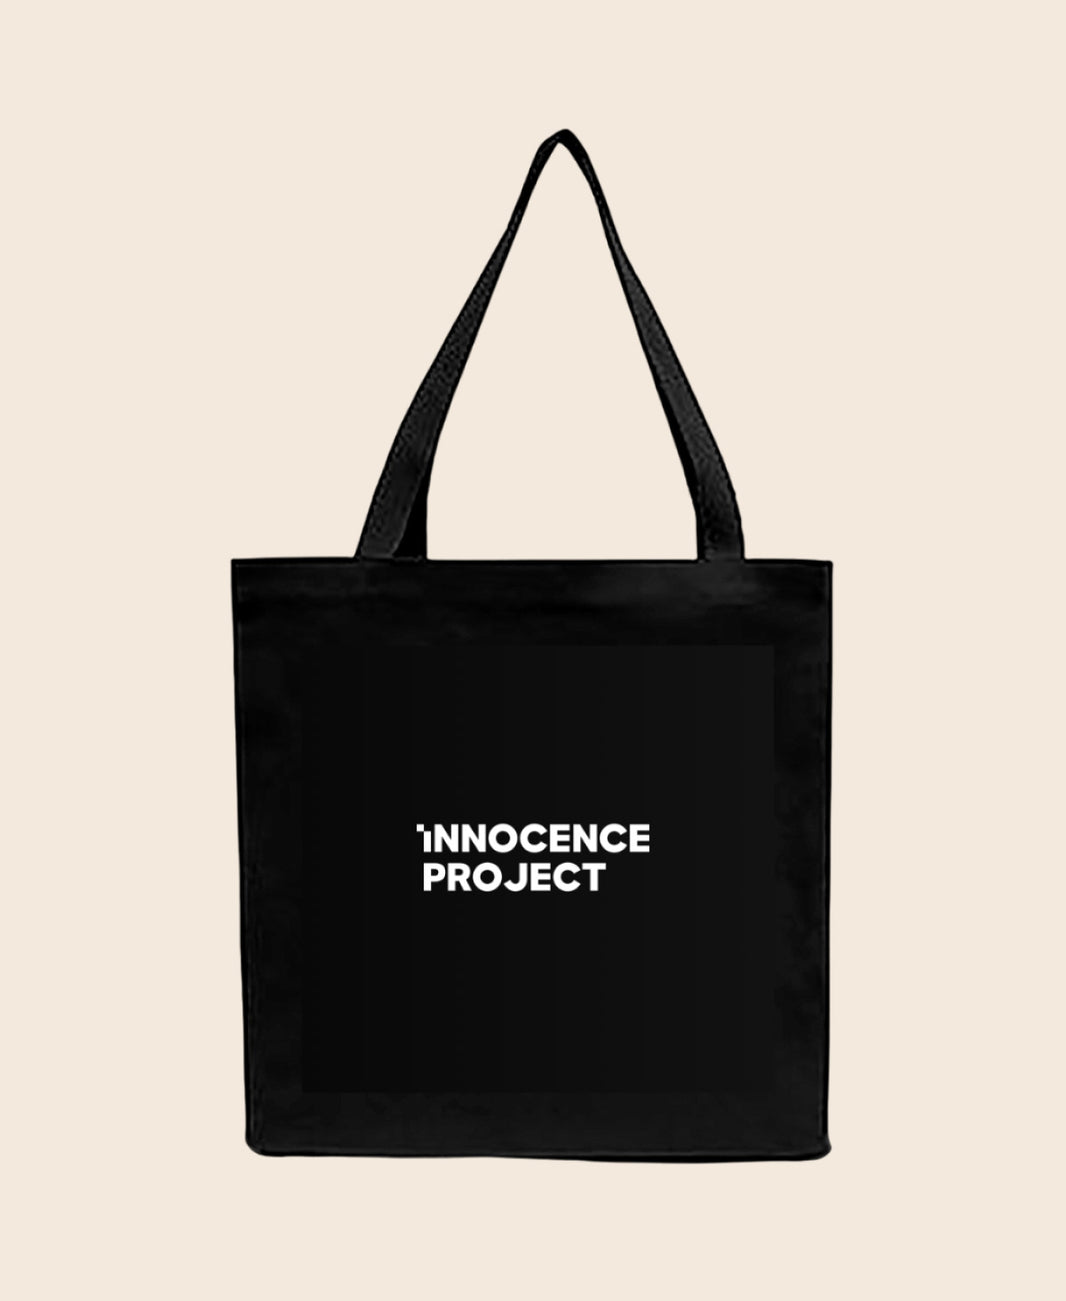 Innocence Project Shop – SHOP for the Innocence Project